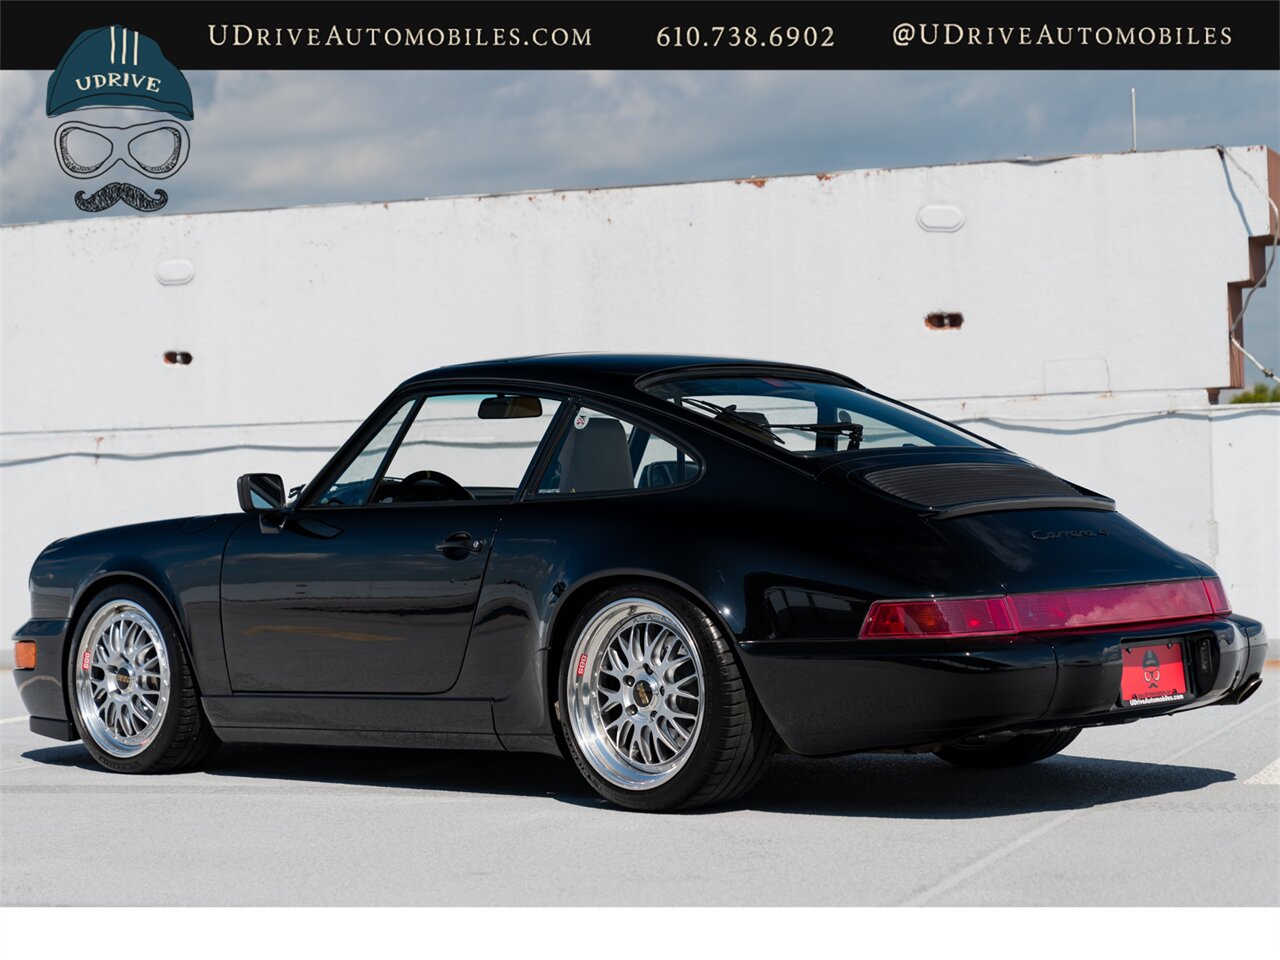 1989 Porsche 911 Carrera 4  964 C4 5 Speed Manual $63k Recent Service and Upgrades - Photo 24 - West Chester, PA 19382